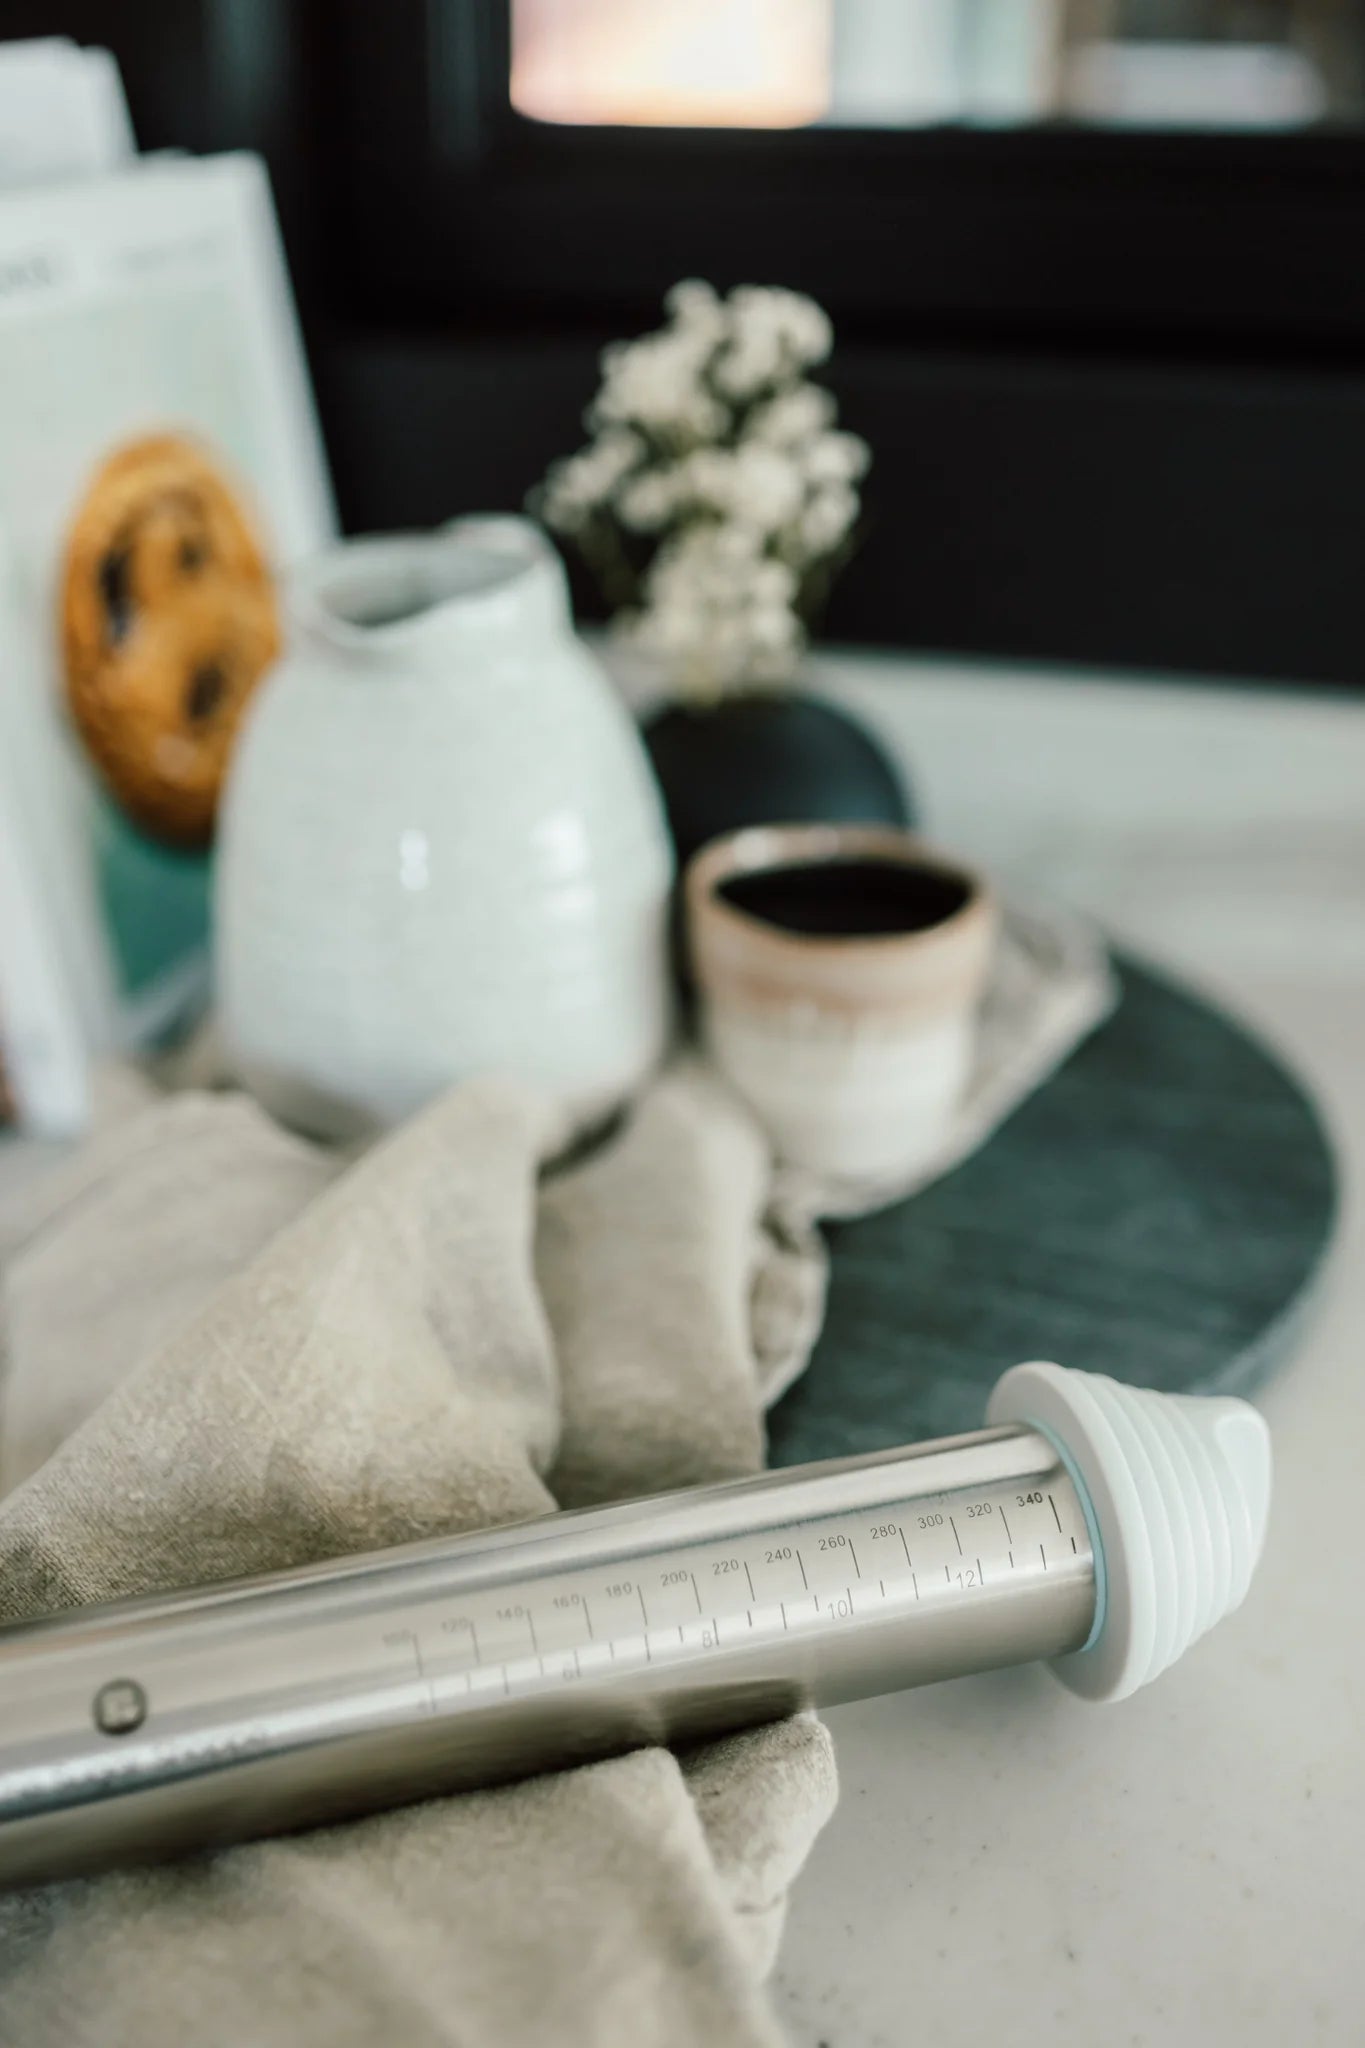 The Sugar Shoppe Adjustable Rolling Pin